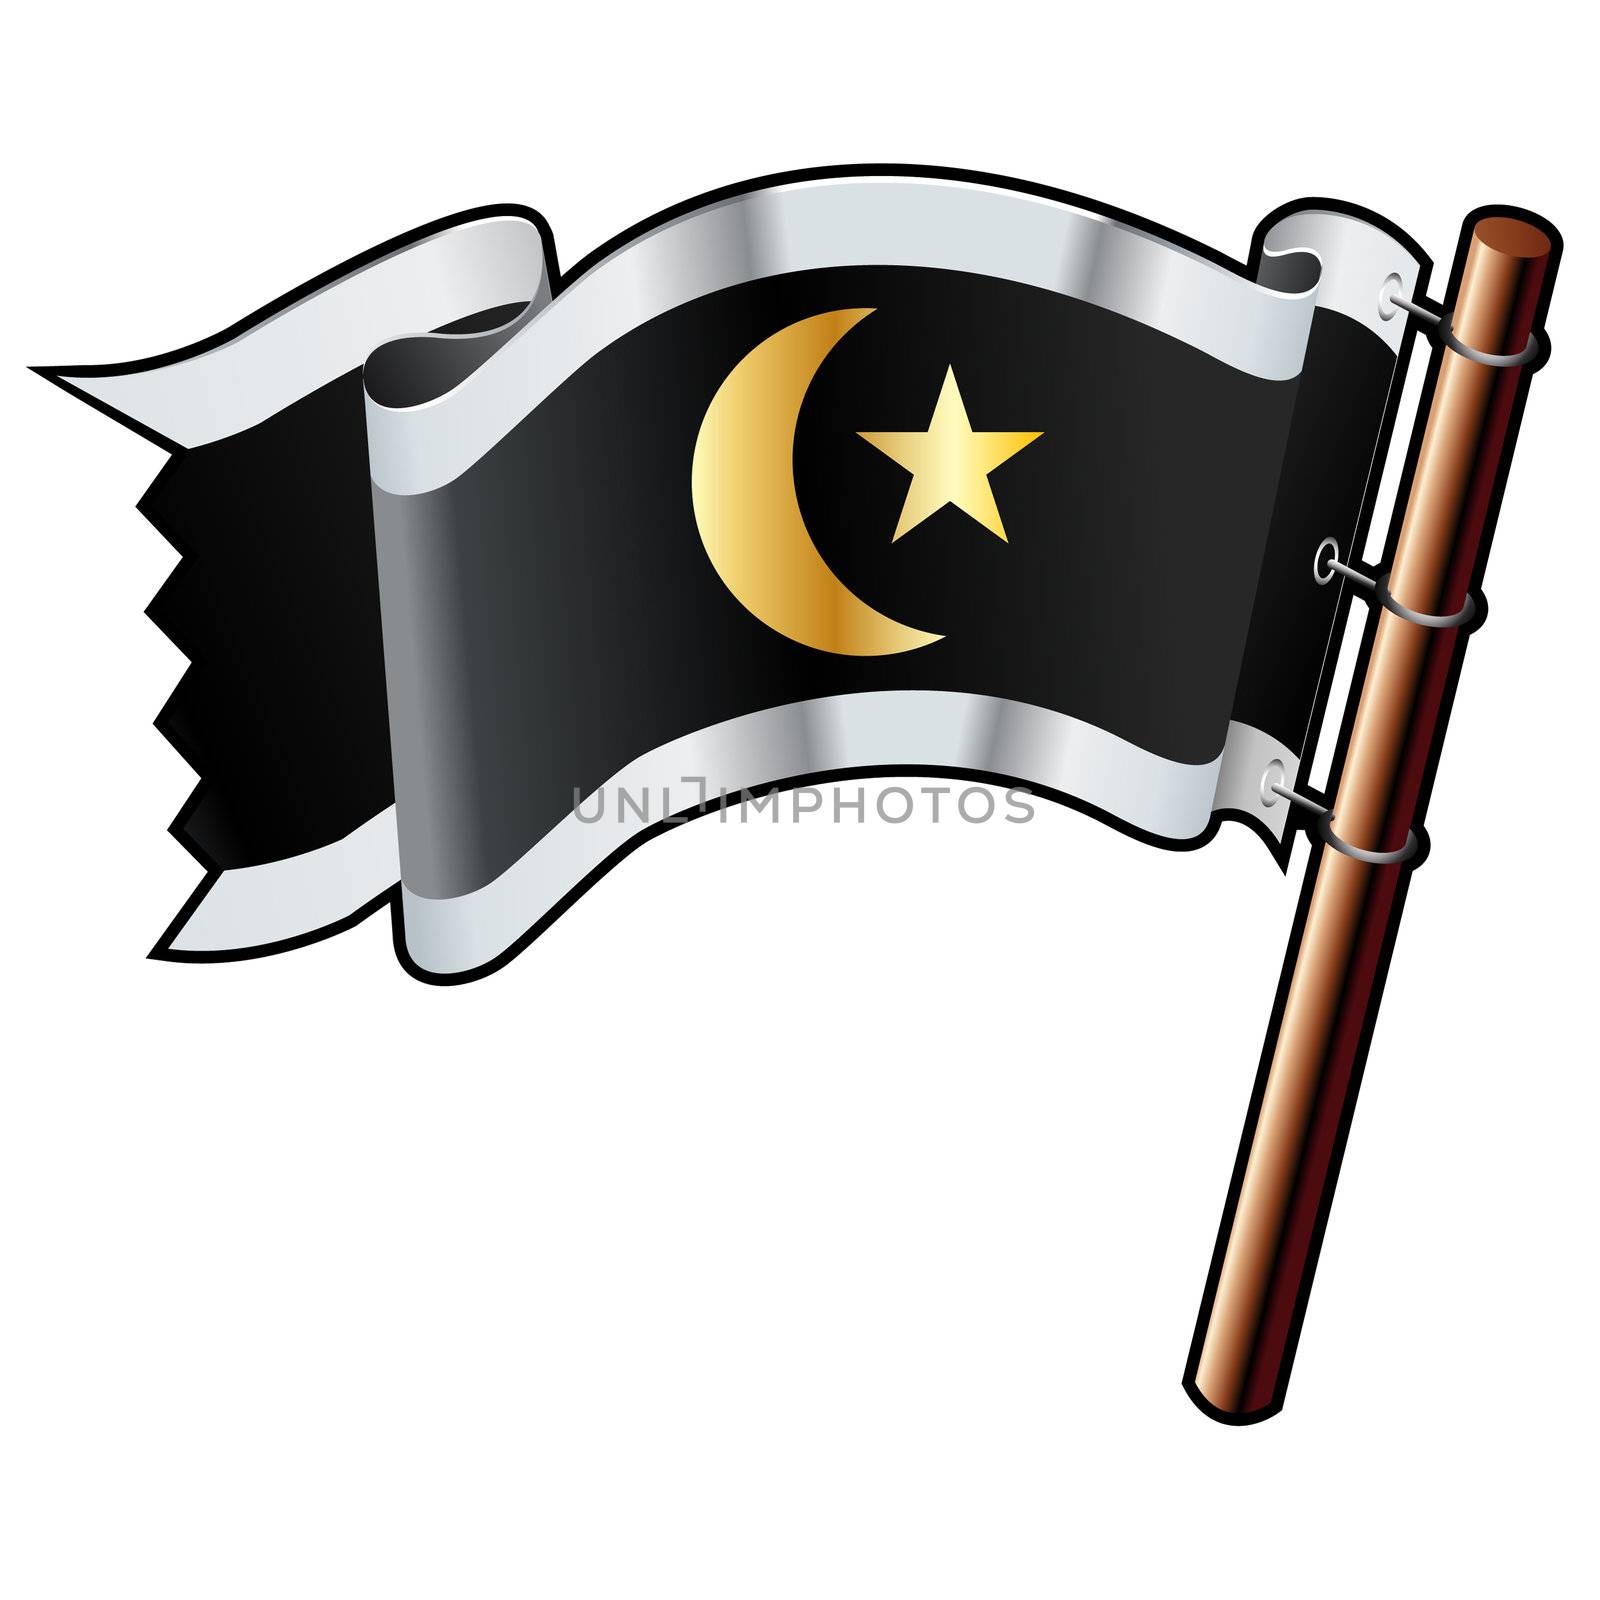 Islamic crescent and star religious on black, silver, and gold vector flag good for use on websites, in print, or on promotional materials